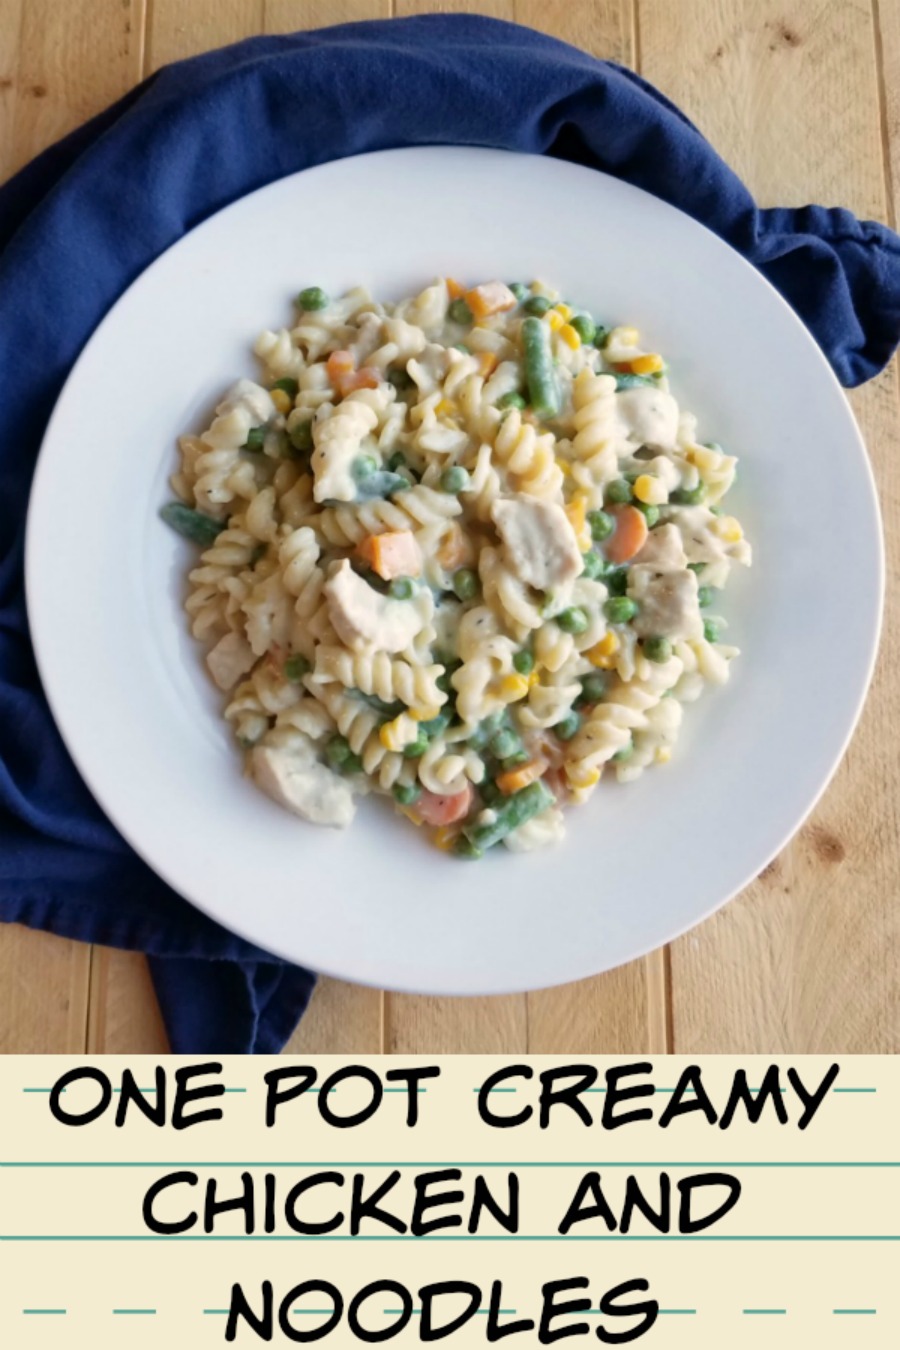 This comforting and simple to make meal is made all in one pot. Creamy chicken and noodles is a great weeknight dinner that is full of flavor and the whole meal is in one dish!